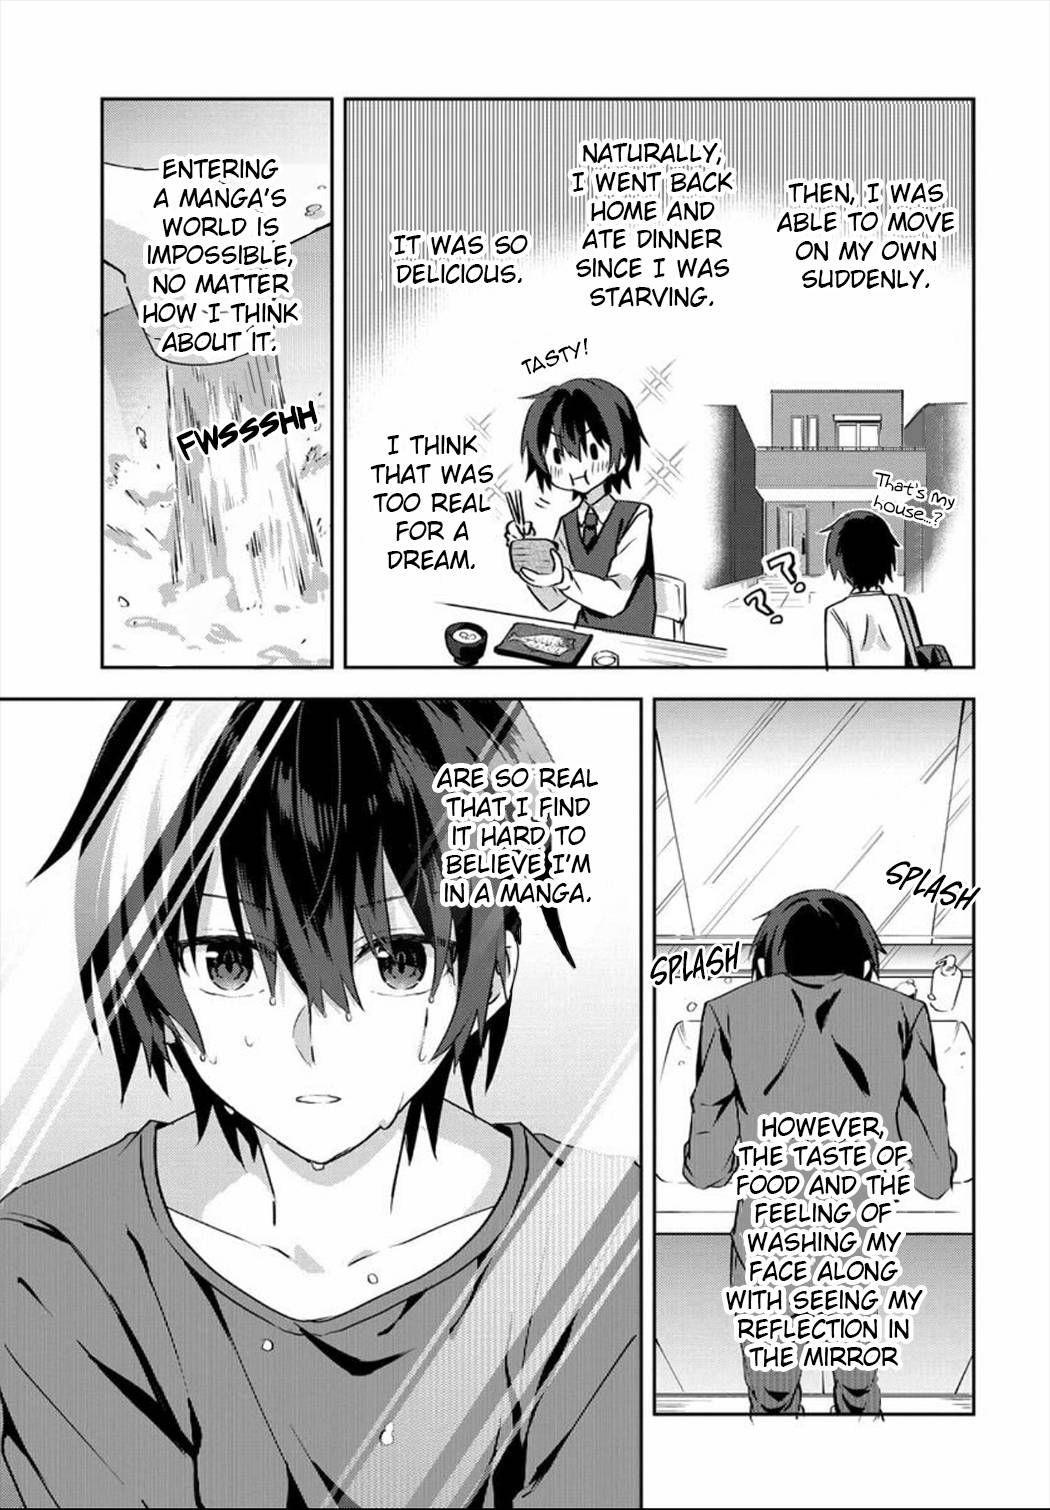 Since I’ve Entered the World of Romantic Comedy Manga, I’ll Do My Best to Make the Losing Heroine Happy. - chapter 2.2 - #2